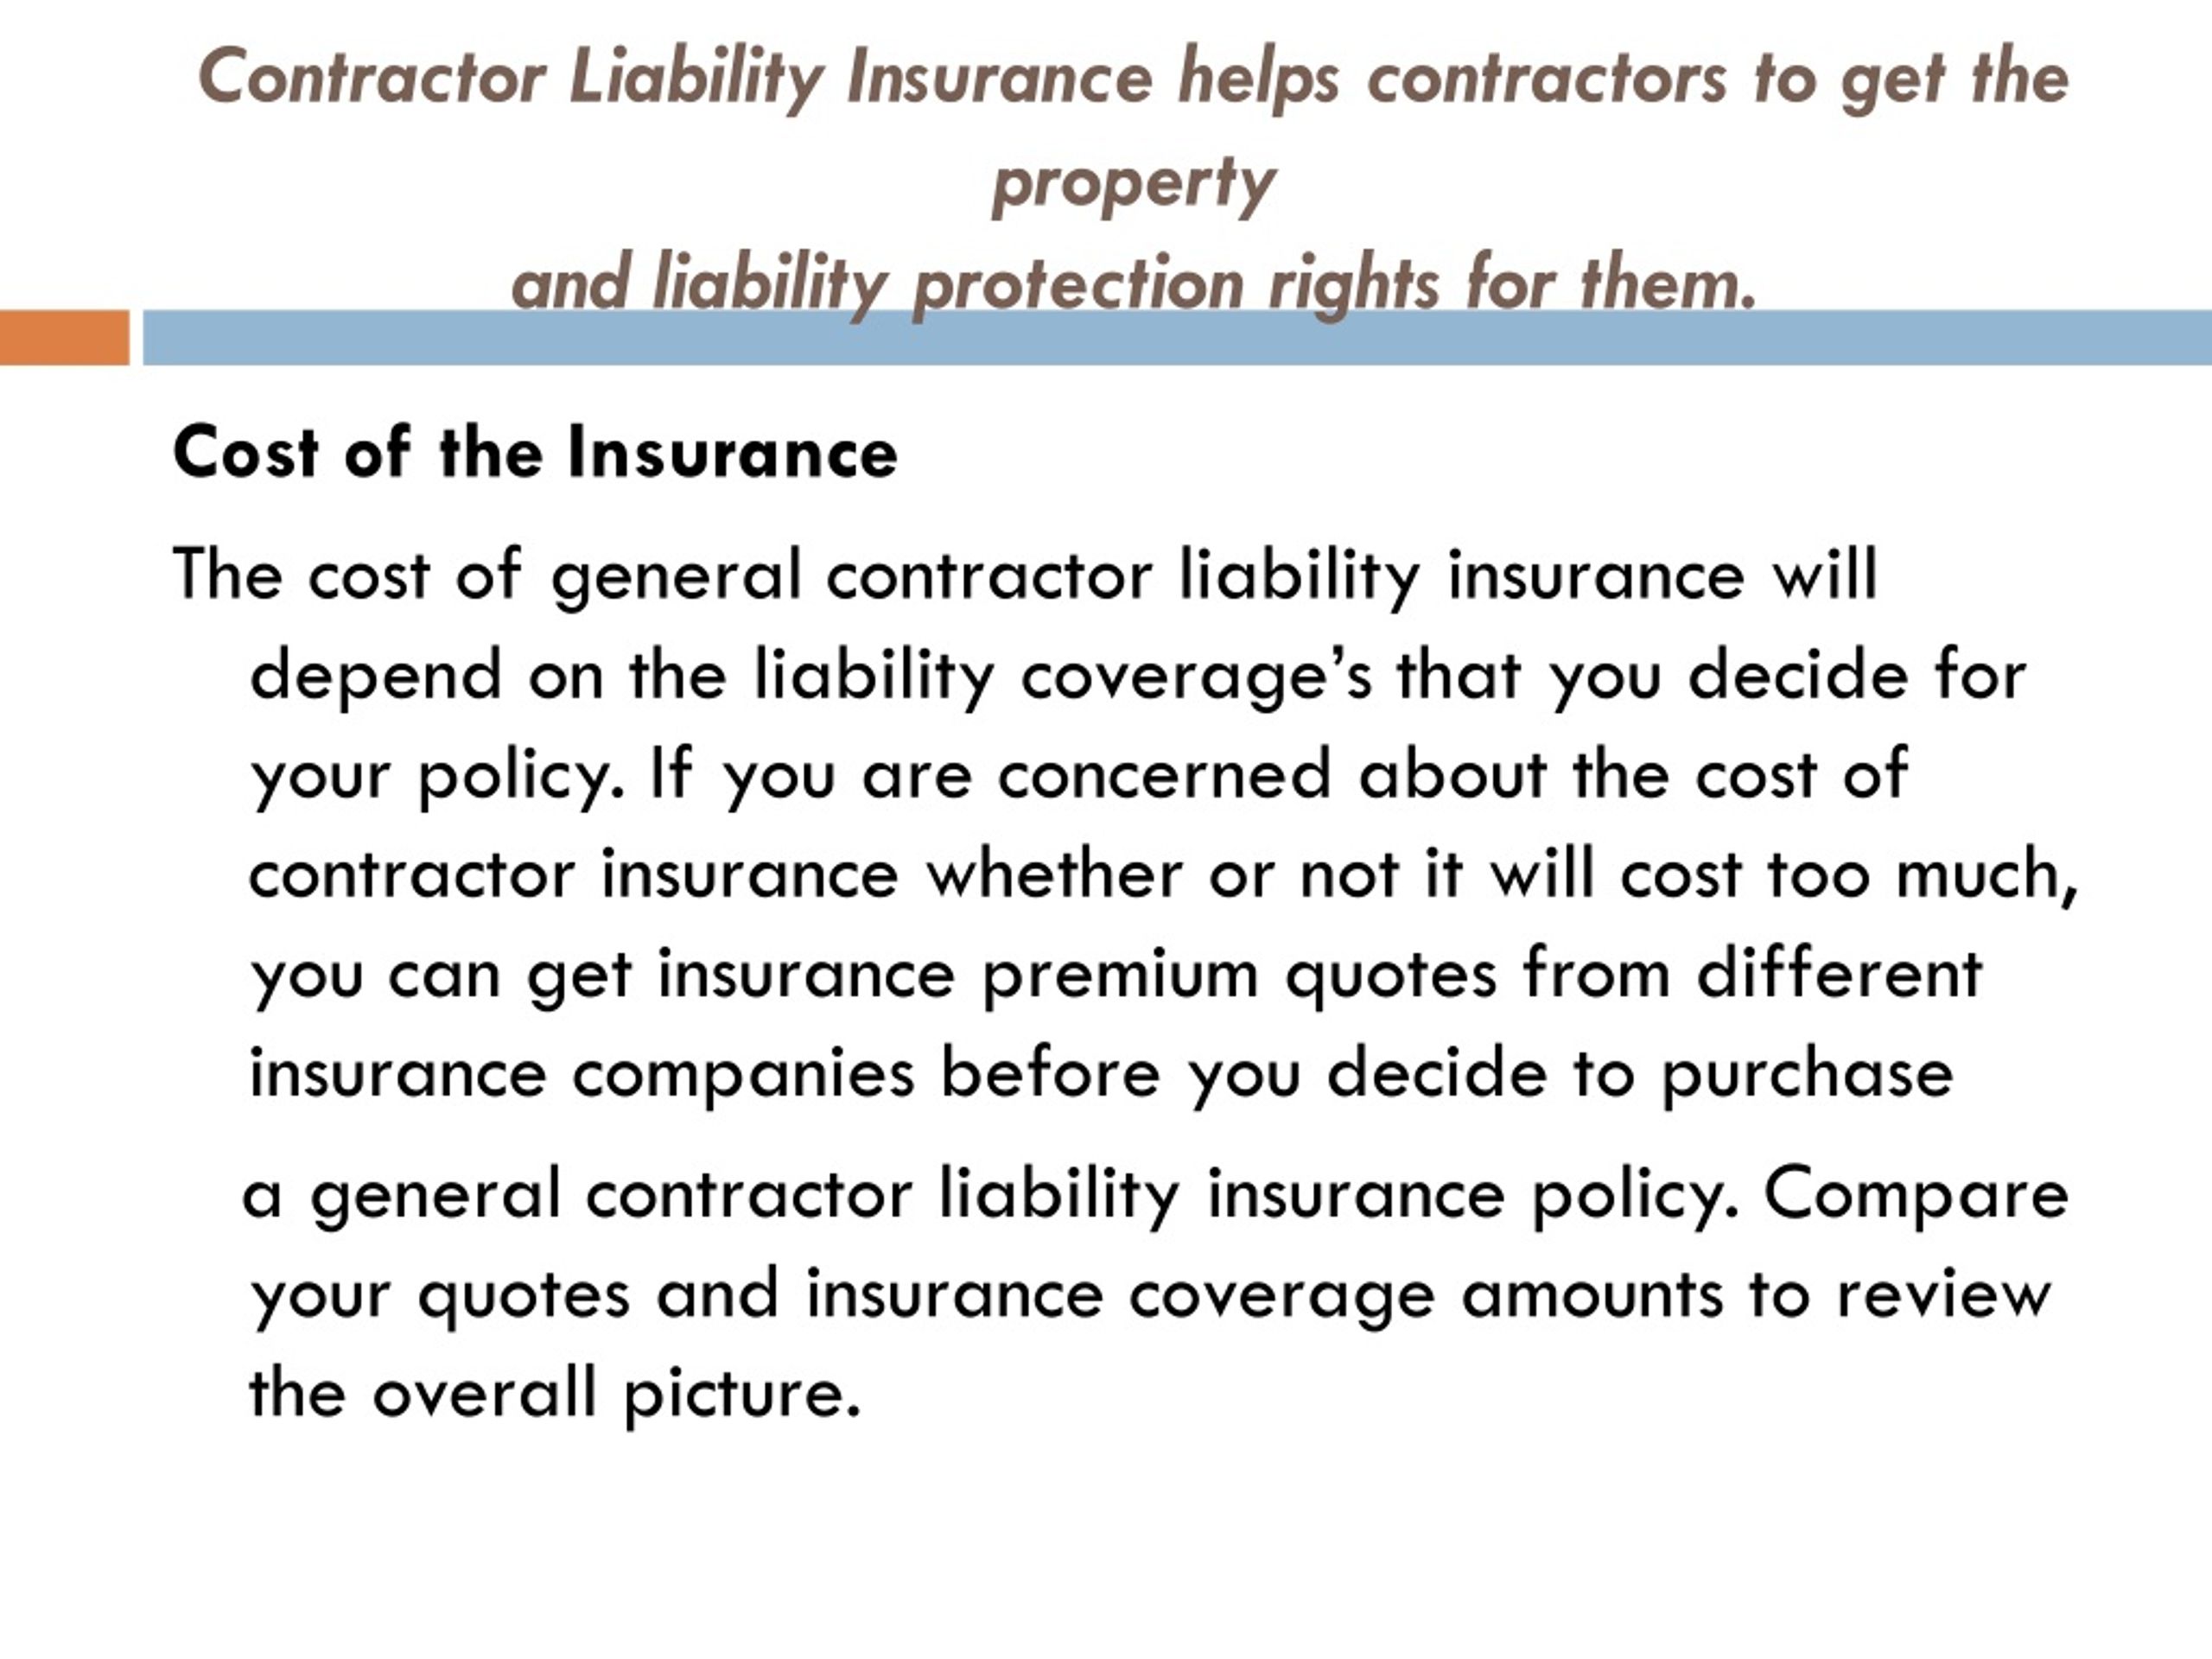 Ppt Contractor Liability Insurance Helps Contractors Powerpoint Presentation Id1493054